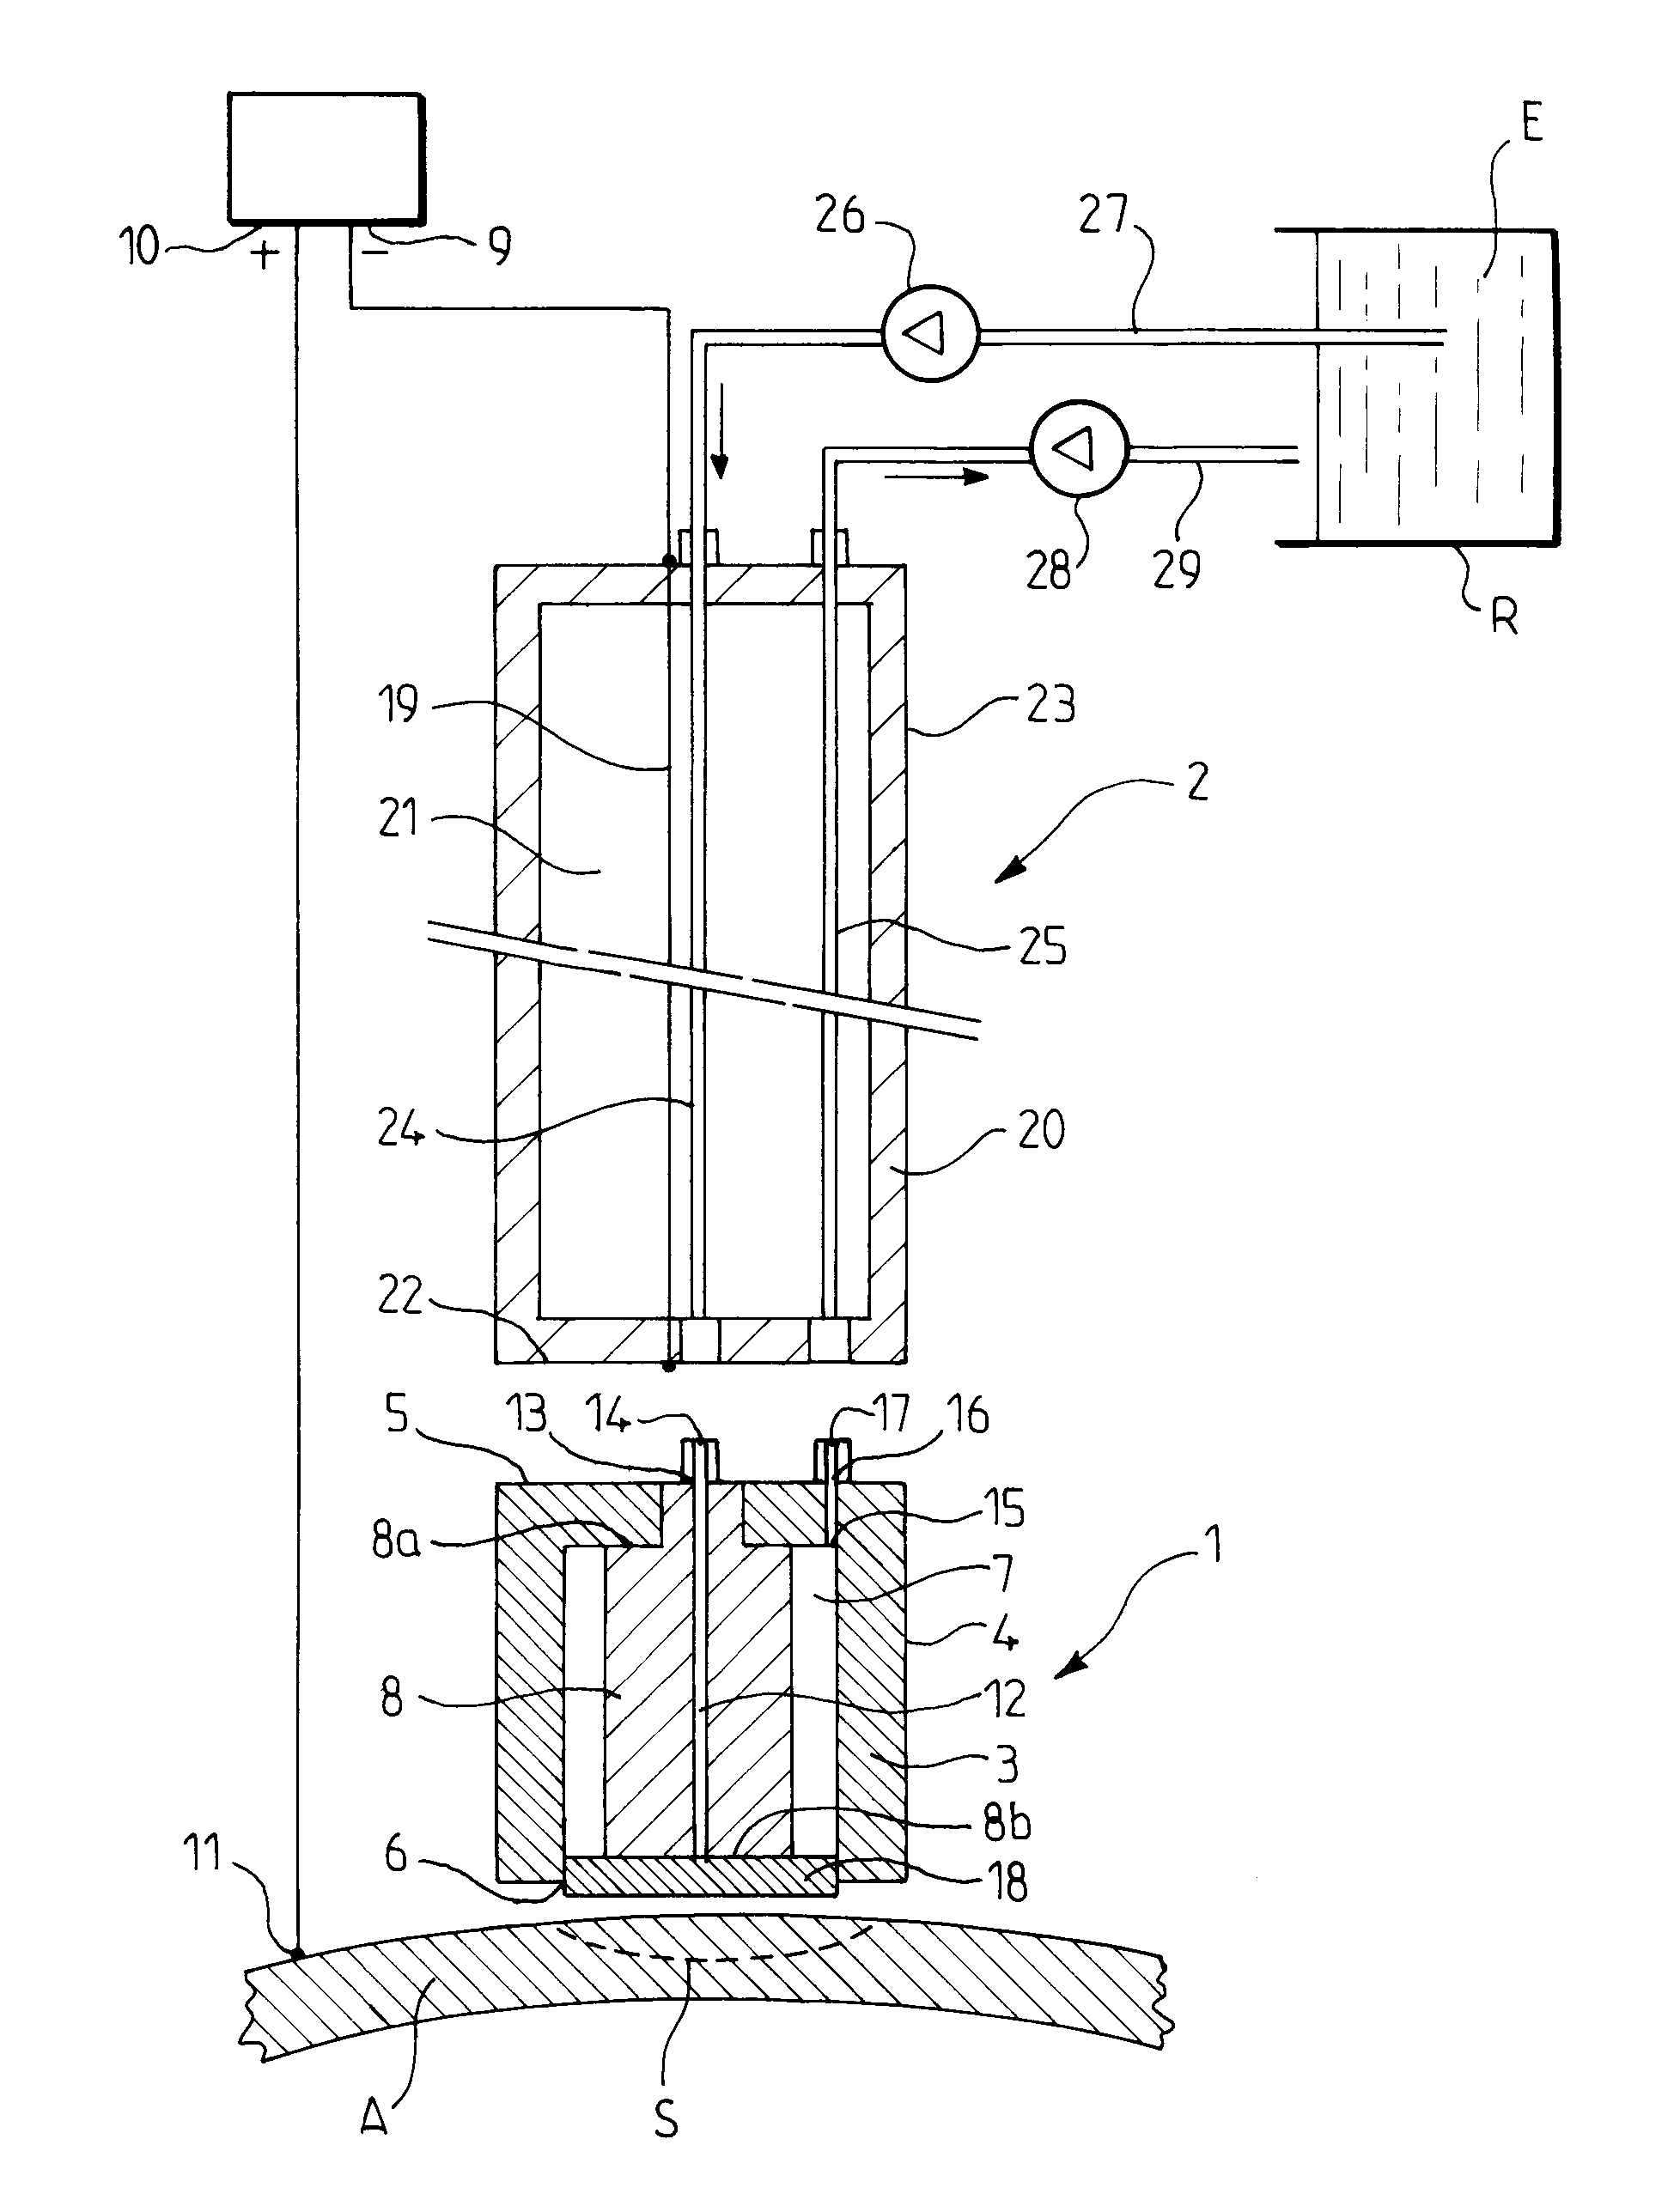 Device for electrochemical treatment, locally in particular, of a conductor substrate